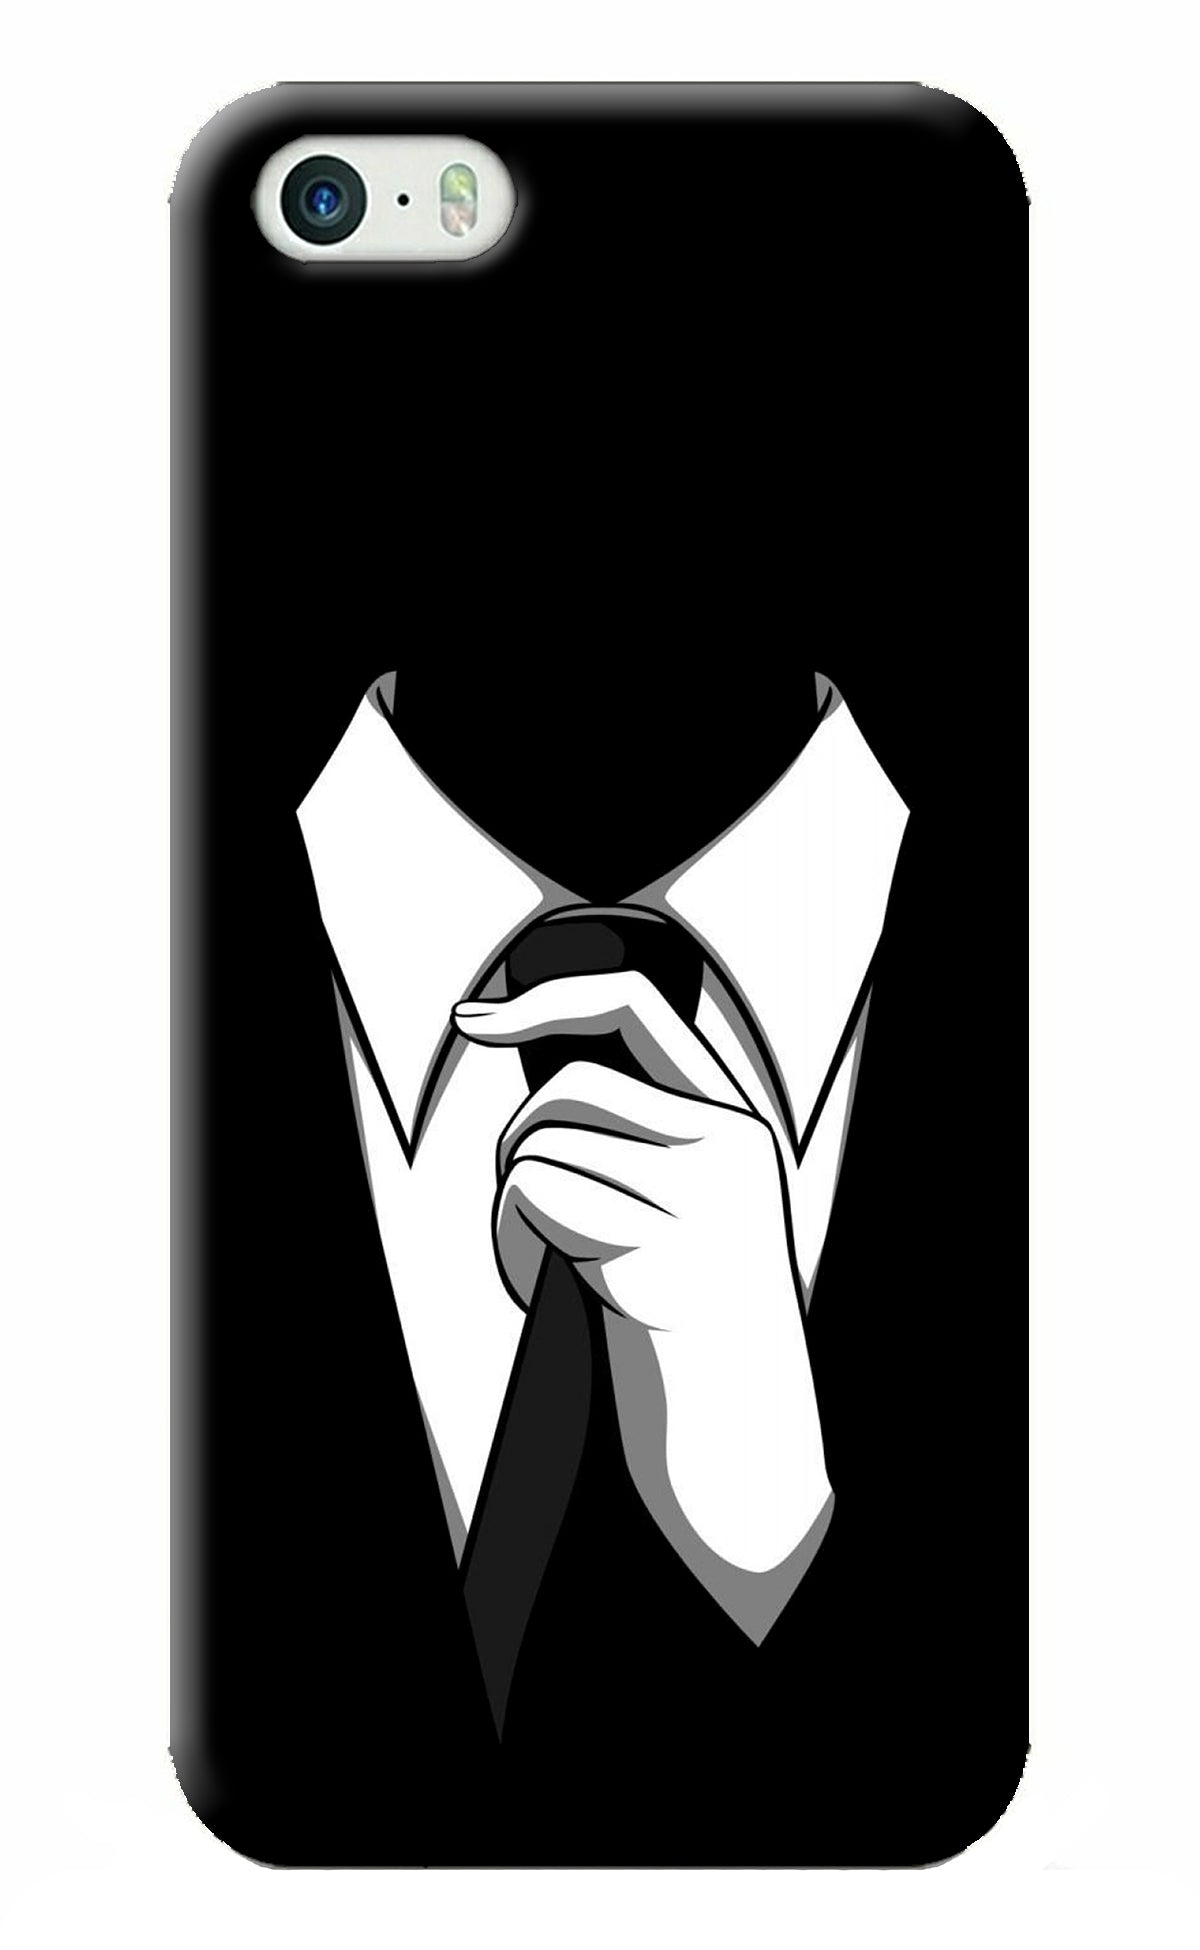 Black Tie iPhone 5/5s Back Cover